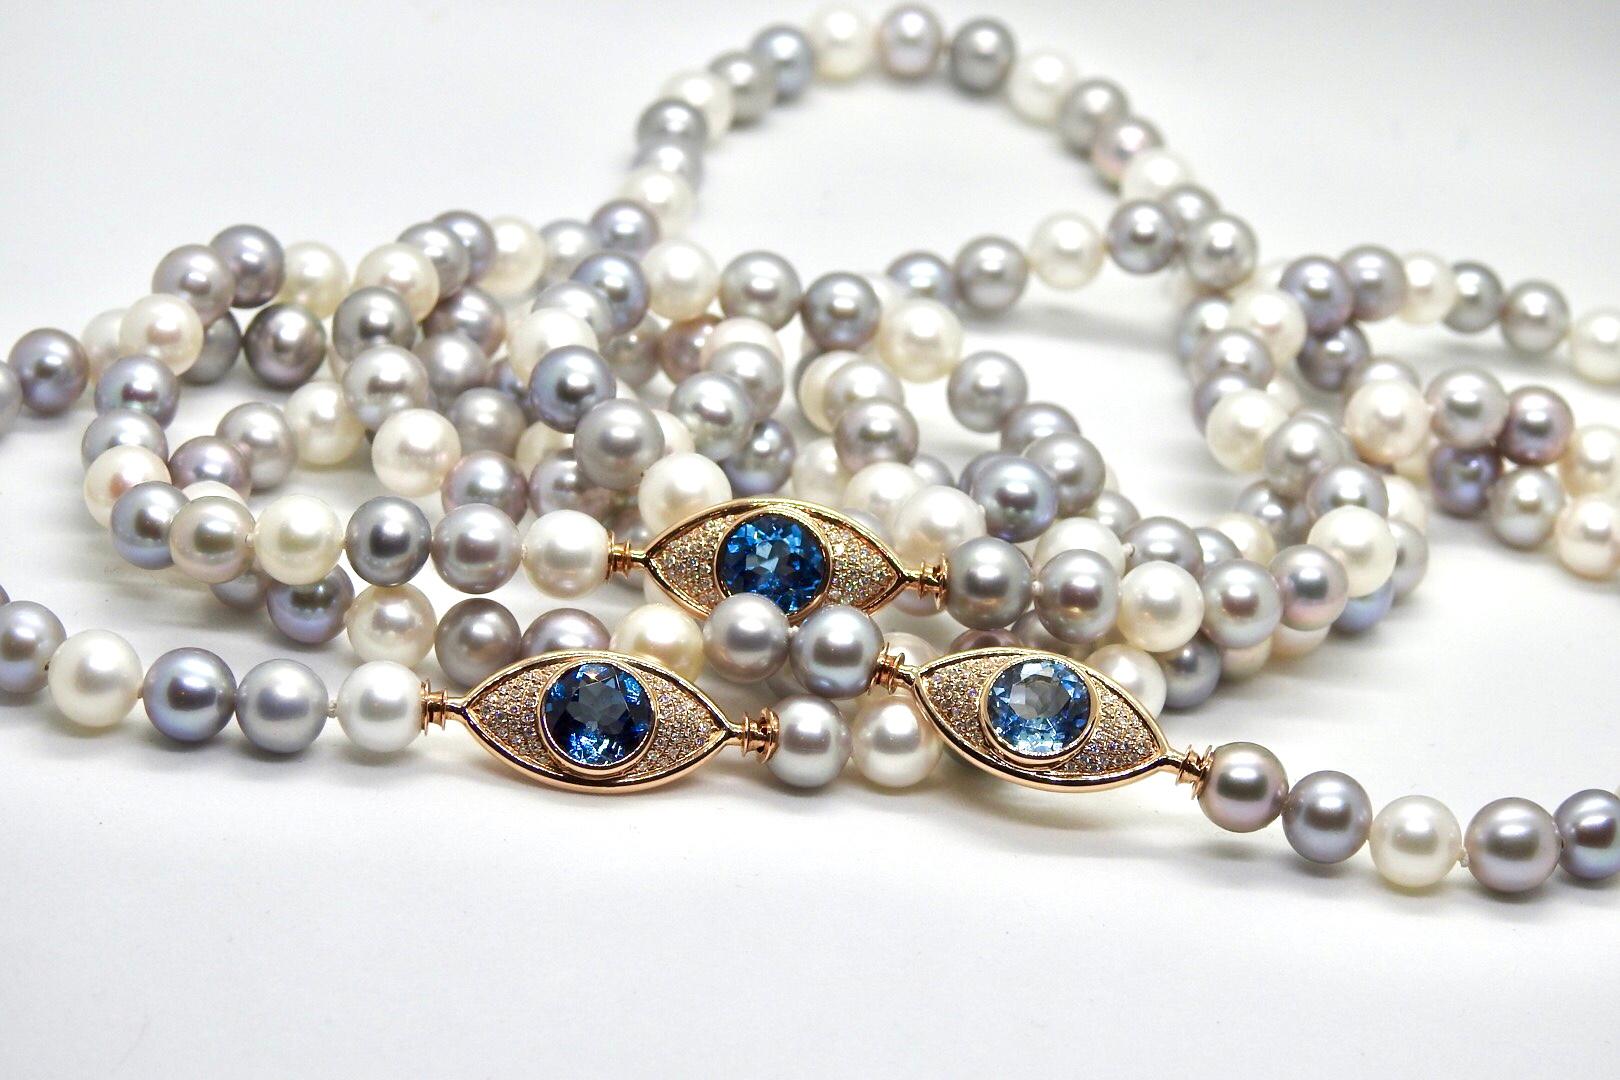 Women's or Men's Pearls Necklace with 18 Karat Gold, Diamonds and London Blue Topaz Eye Clasp For Sale